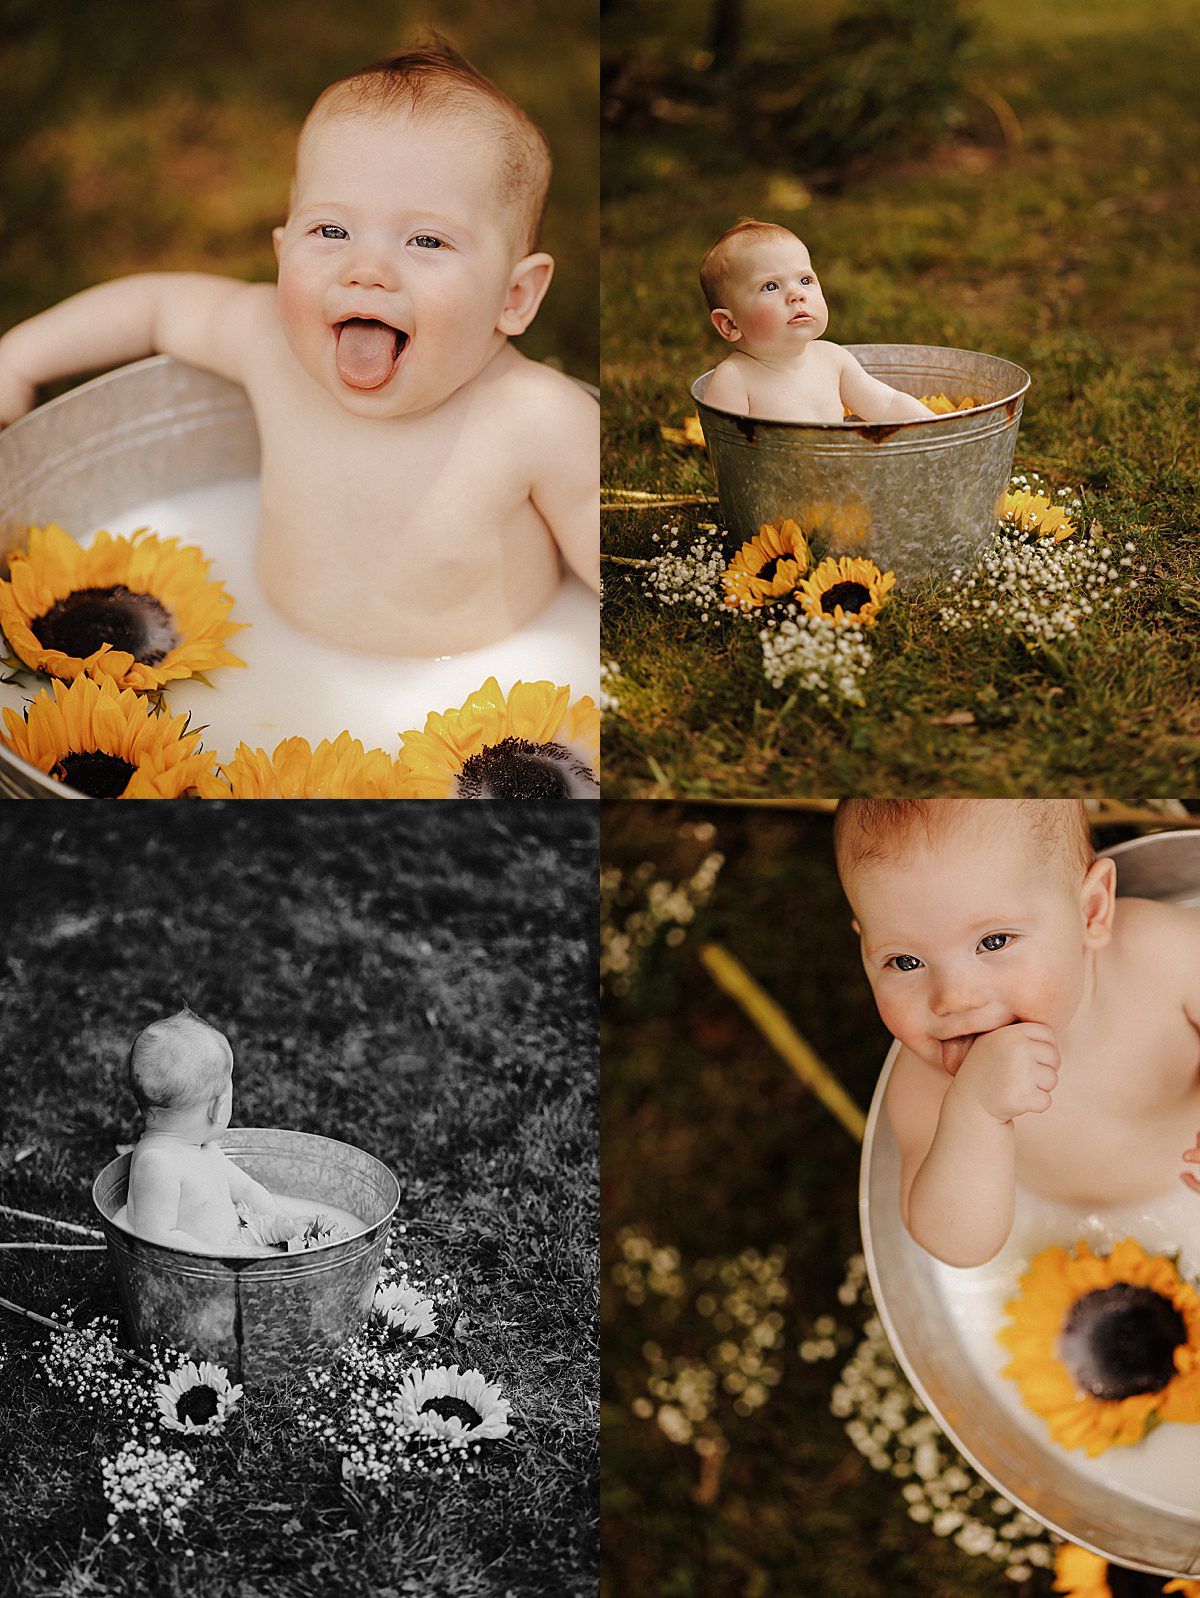 Baby with red hair sits in a bucket with flowers